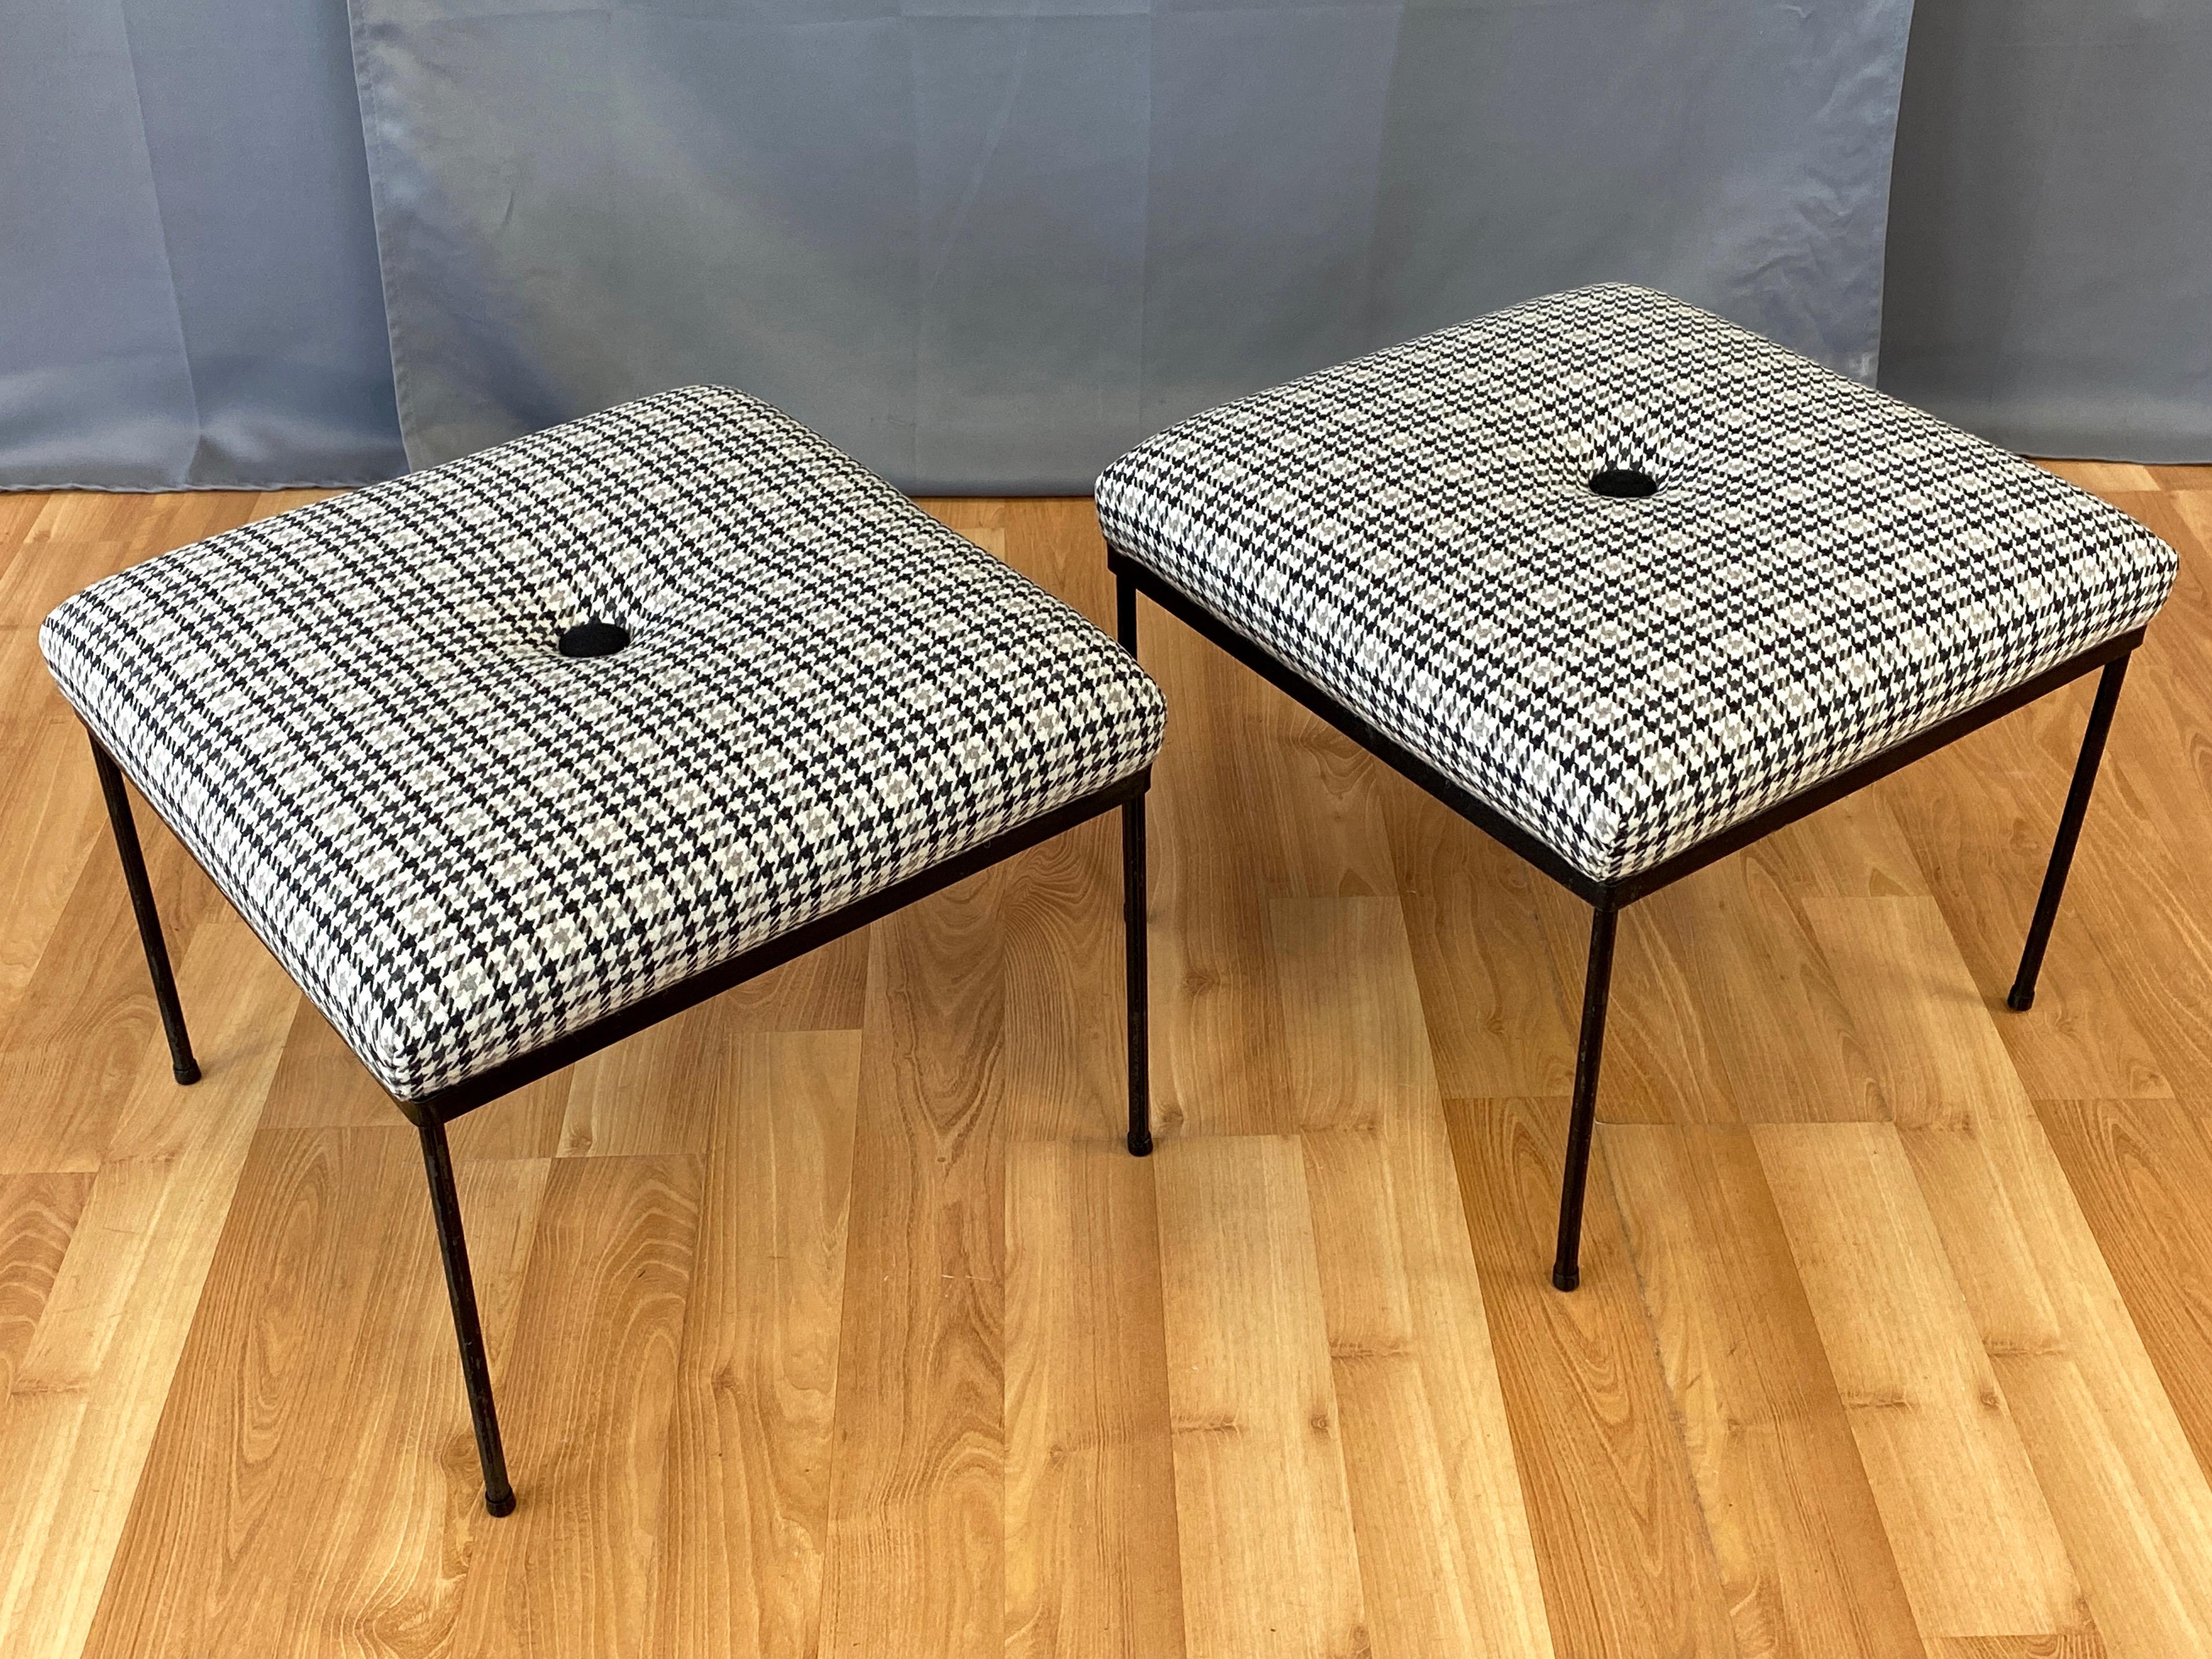 A smartly dressed pair of 1950s Mallin Furniture McCobb-style ottomans with black frames and new houndstooth plaid tufted upholstery.

Minimalist iron frame with slender rod legs on original plastic feet. Semi-gloss black lacquer over matte black